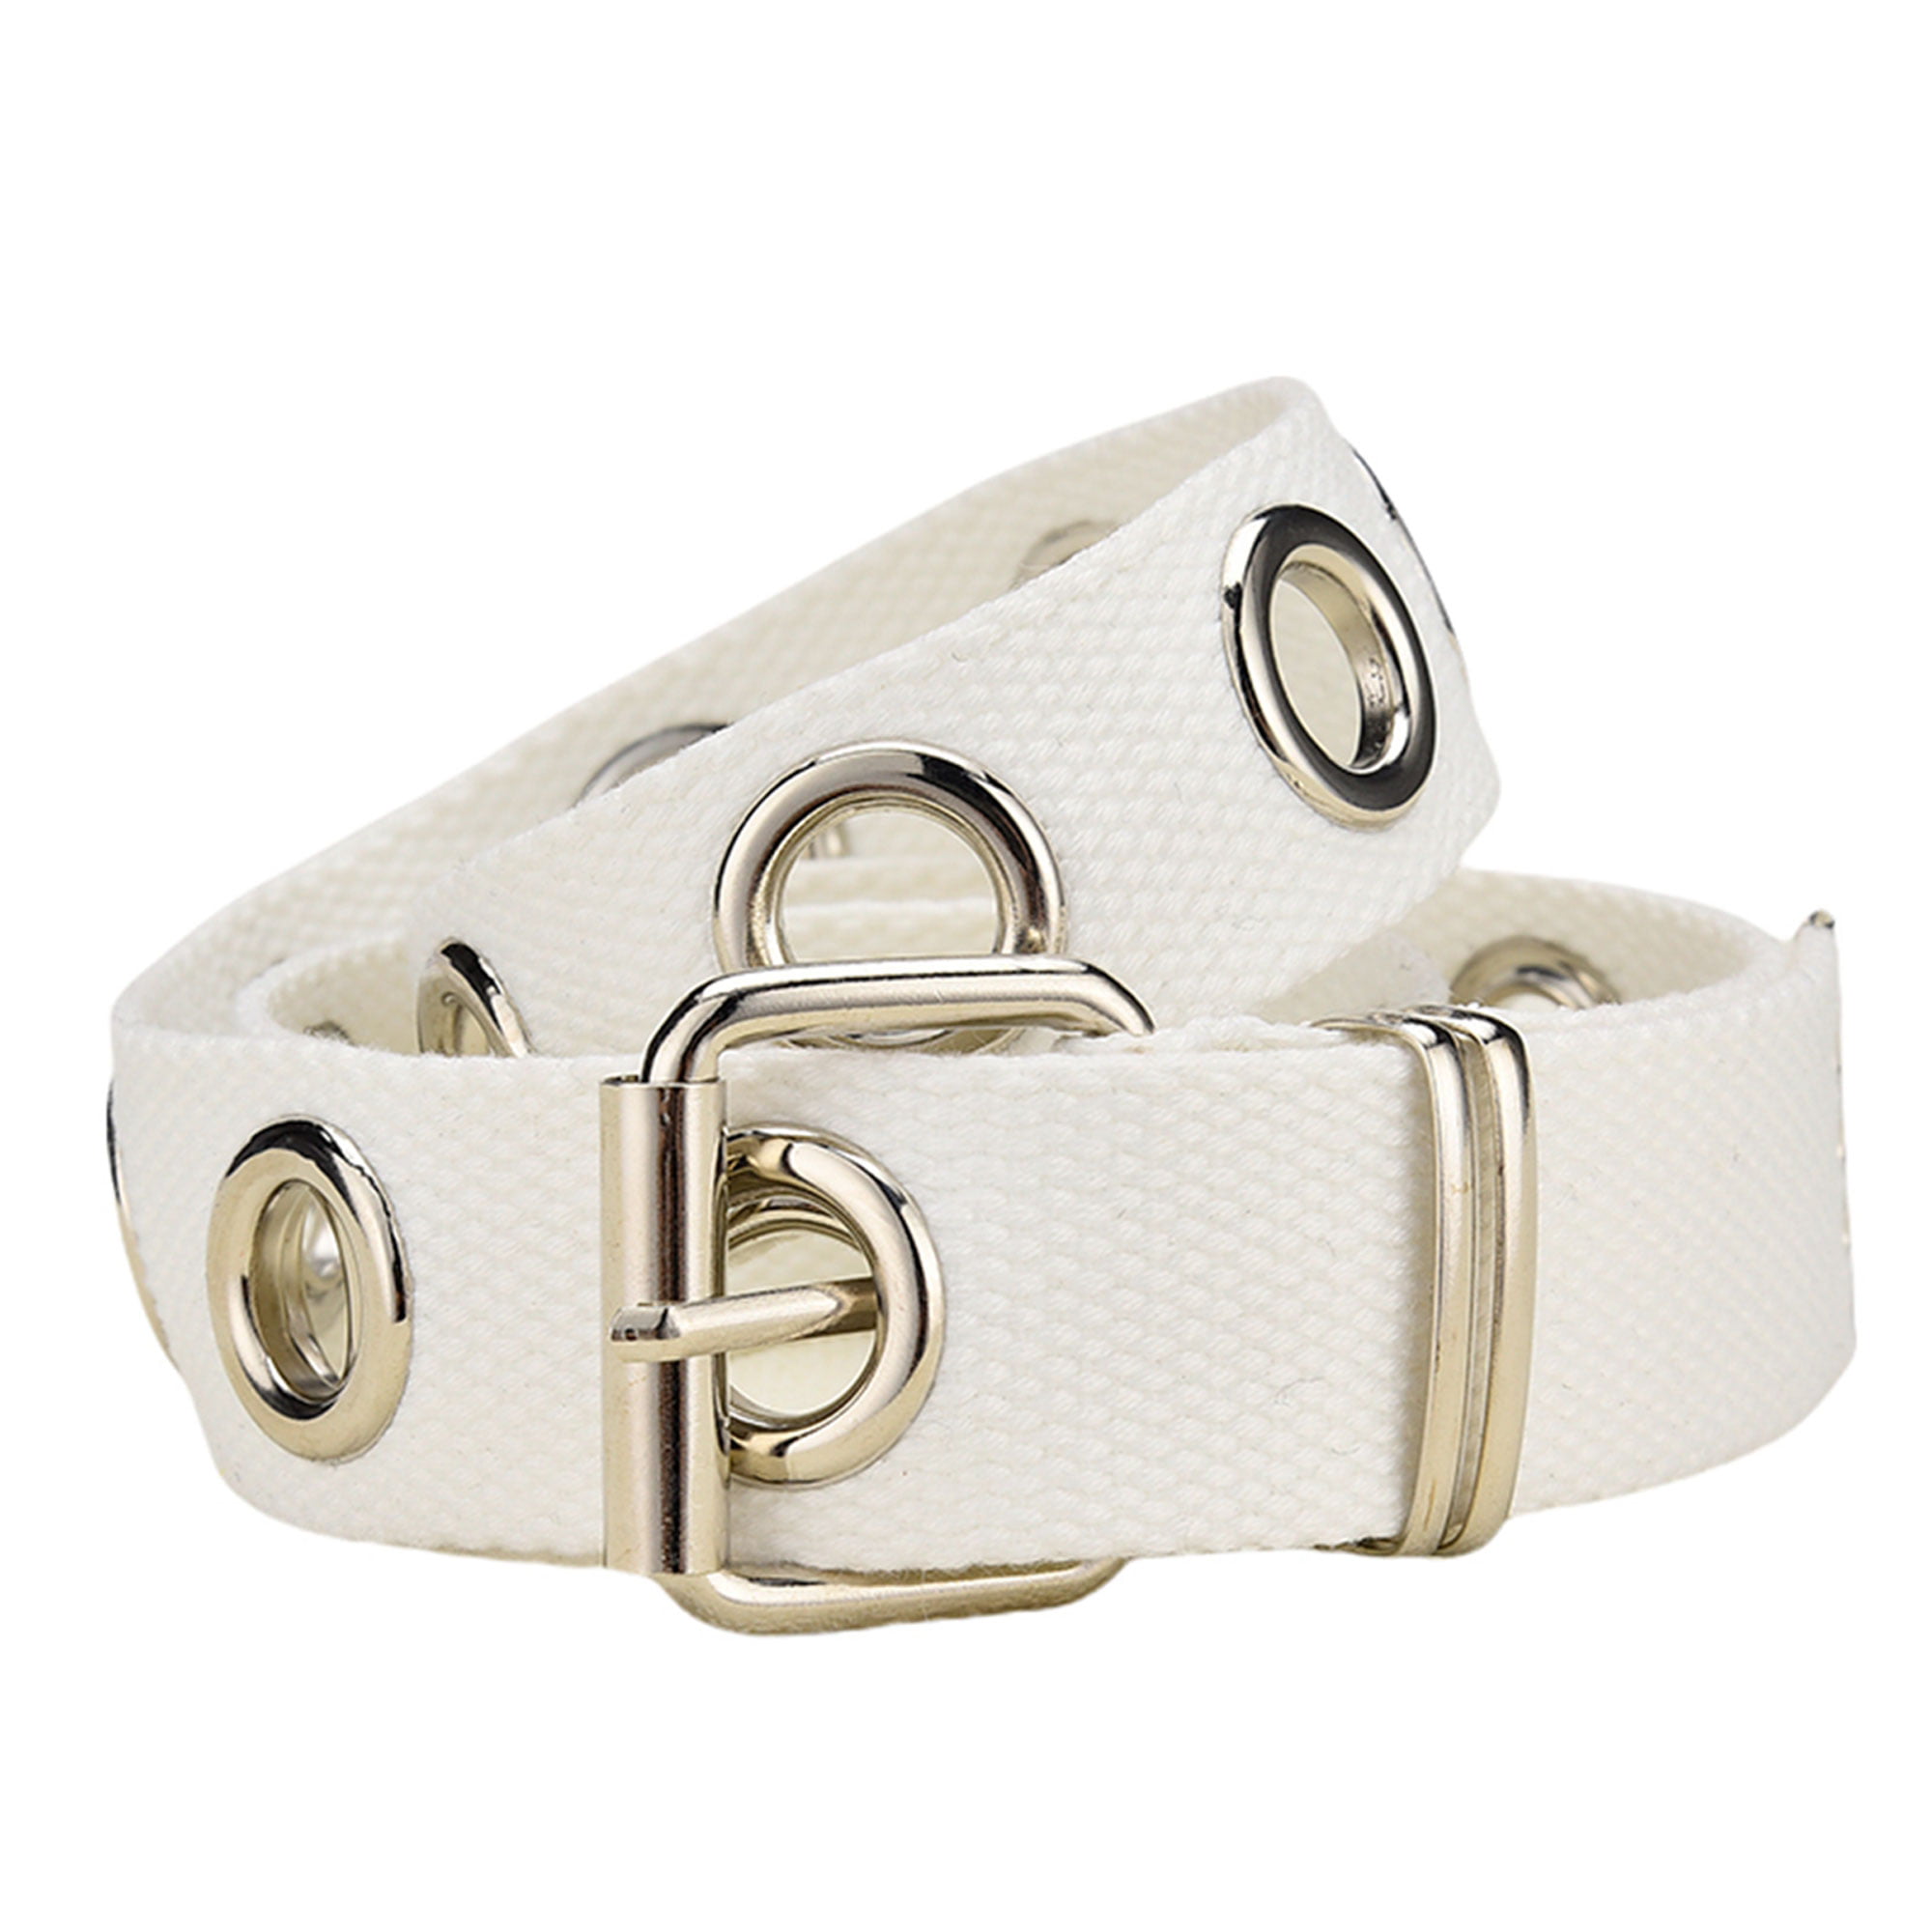 B-102 Unisex Row Grommet Bonded Leather Belt with Metal Buckle Style 